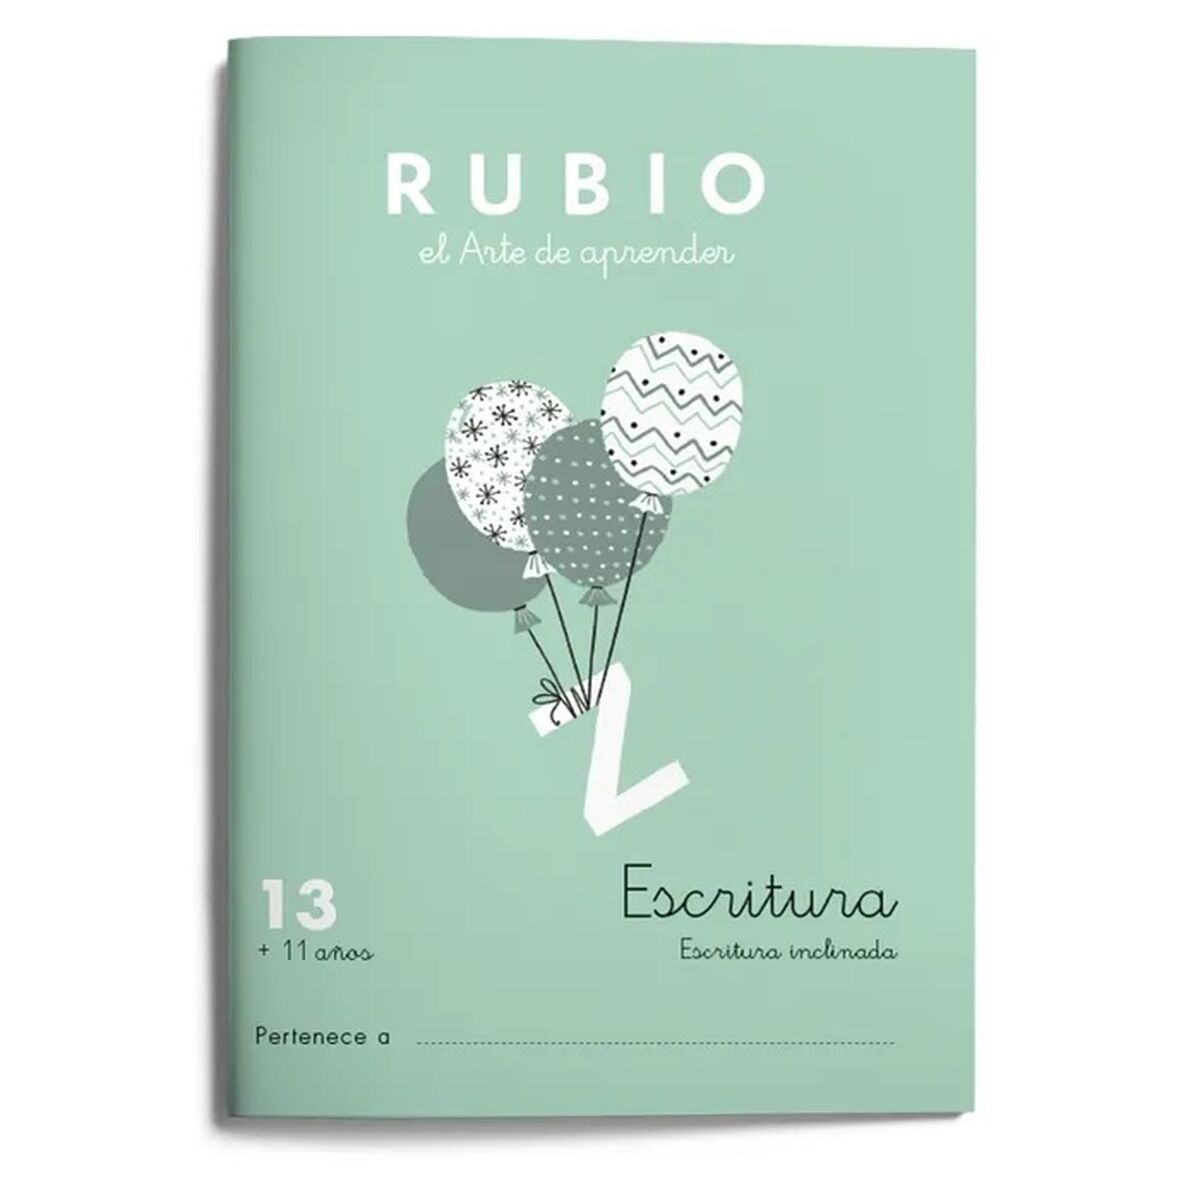 Writing and calligraphy notebook Rubio Nº13 A5 Spanish 20 Sheets (10 Units)